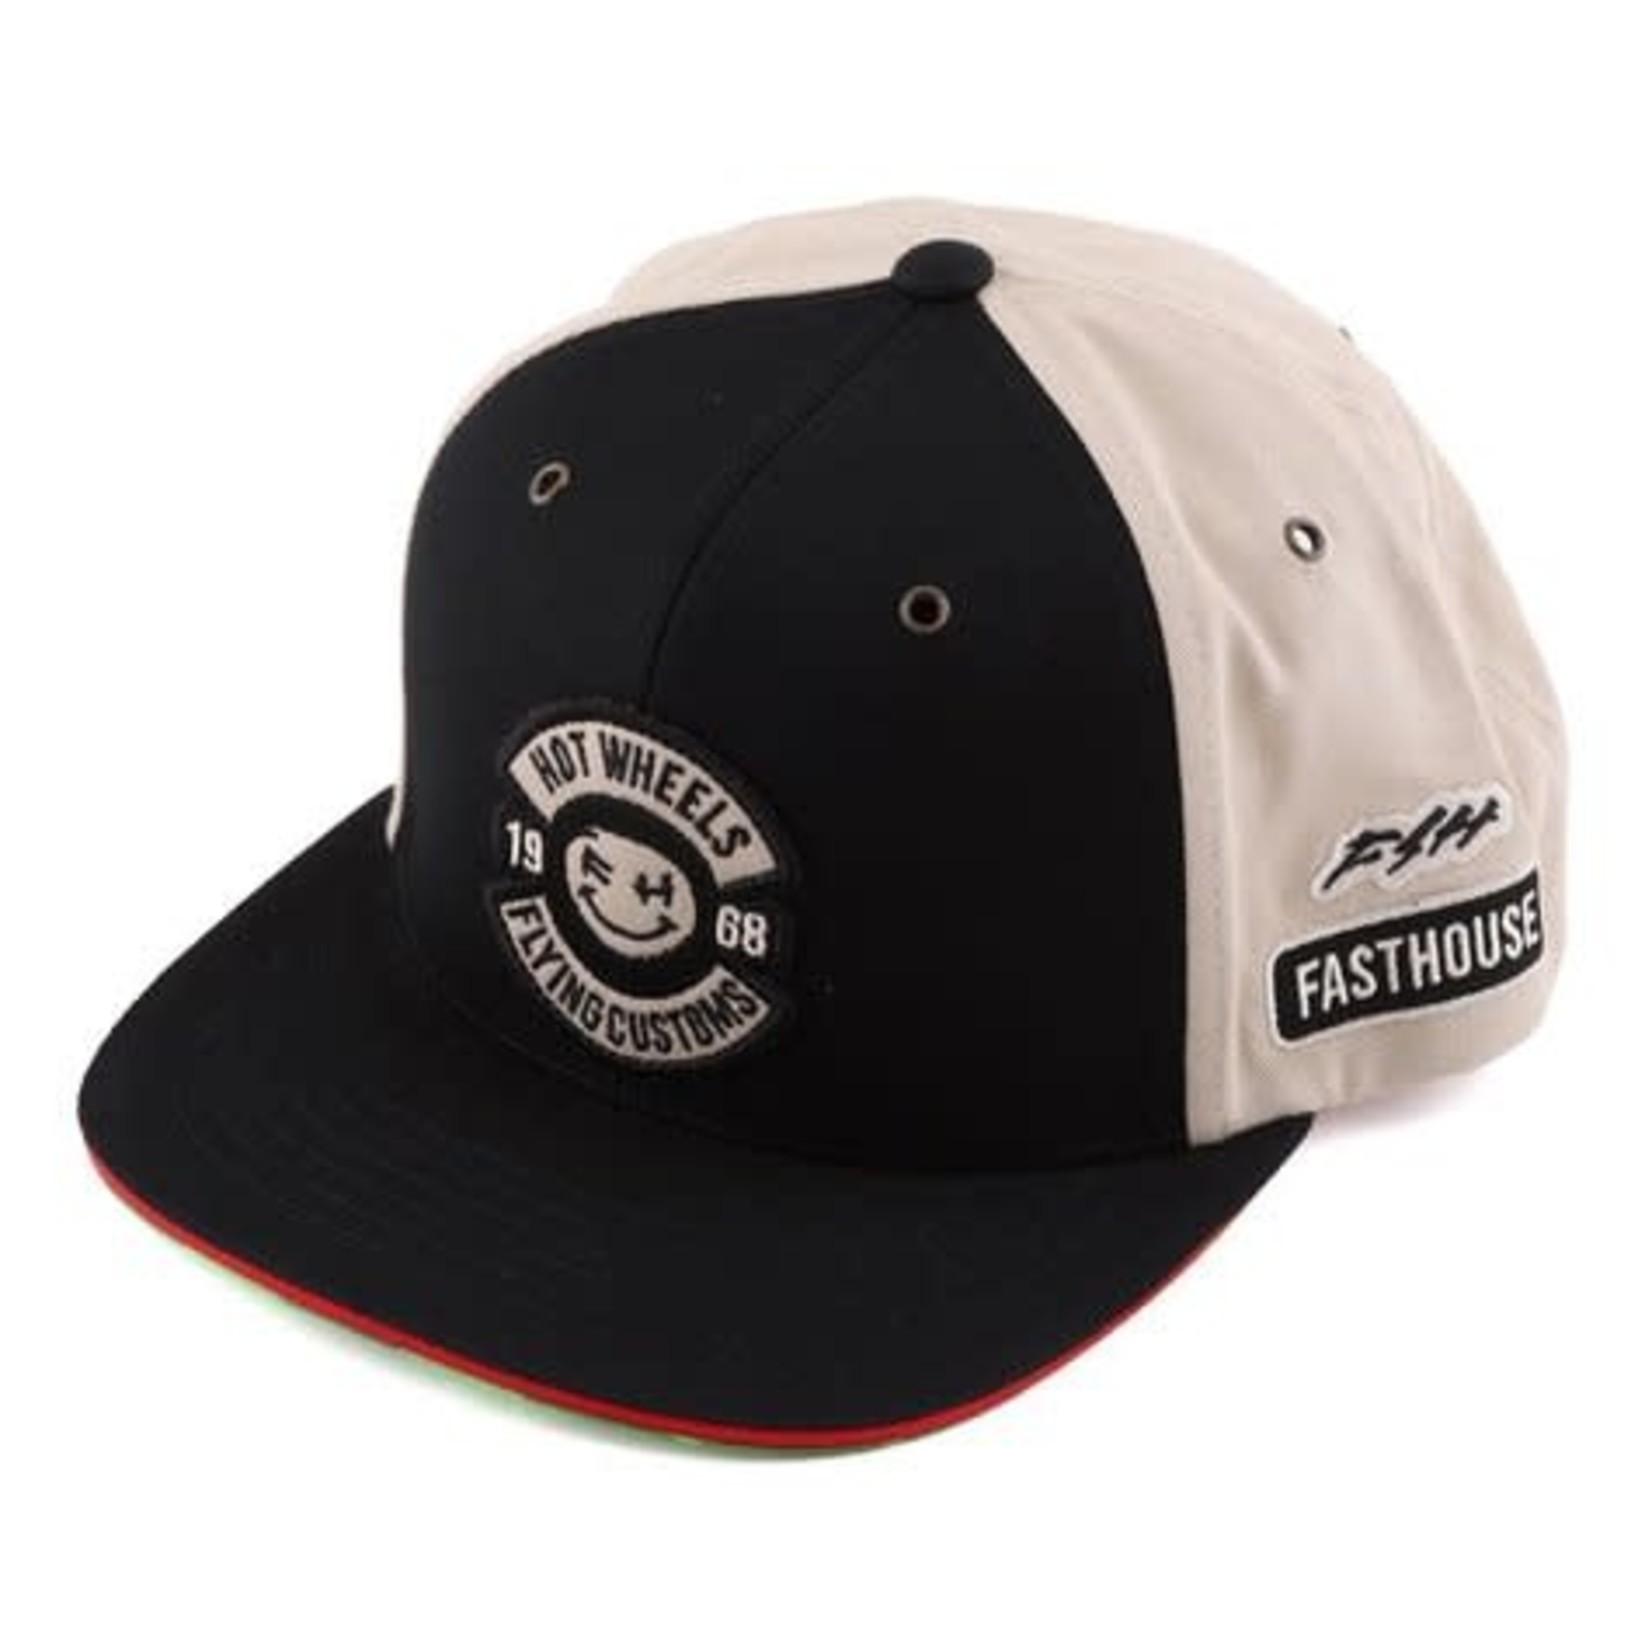 FASTHOUSE YOUTH Dash Hot Wheels Hat [Black/Natural] [OS]